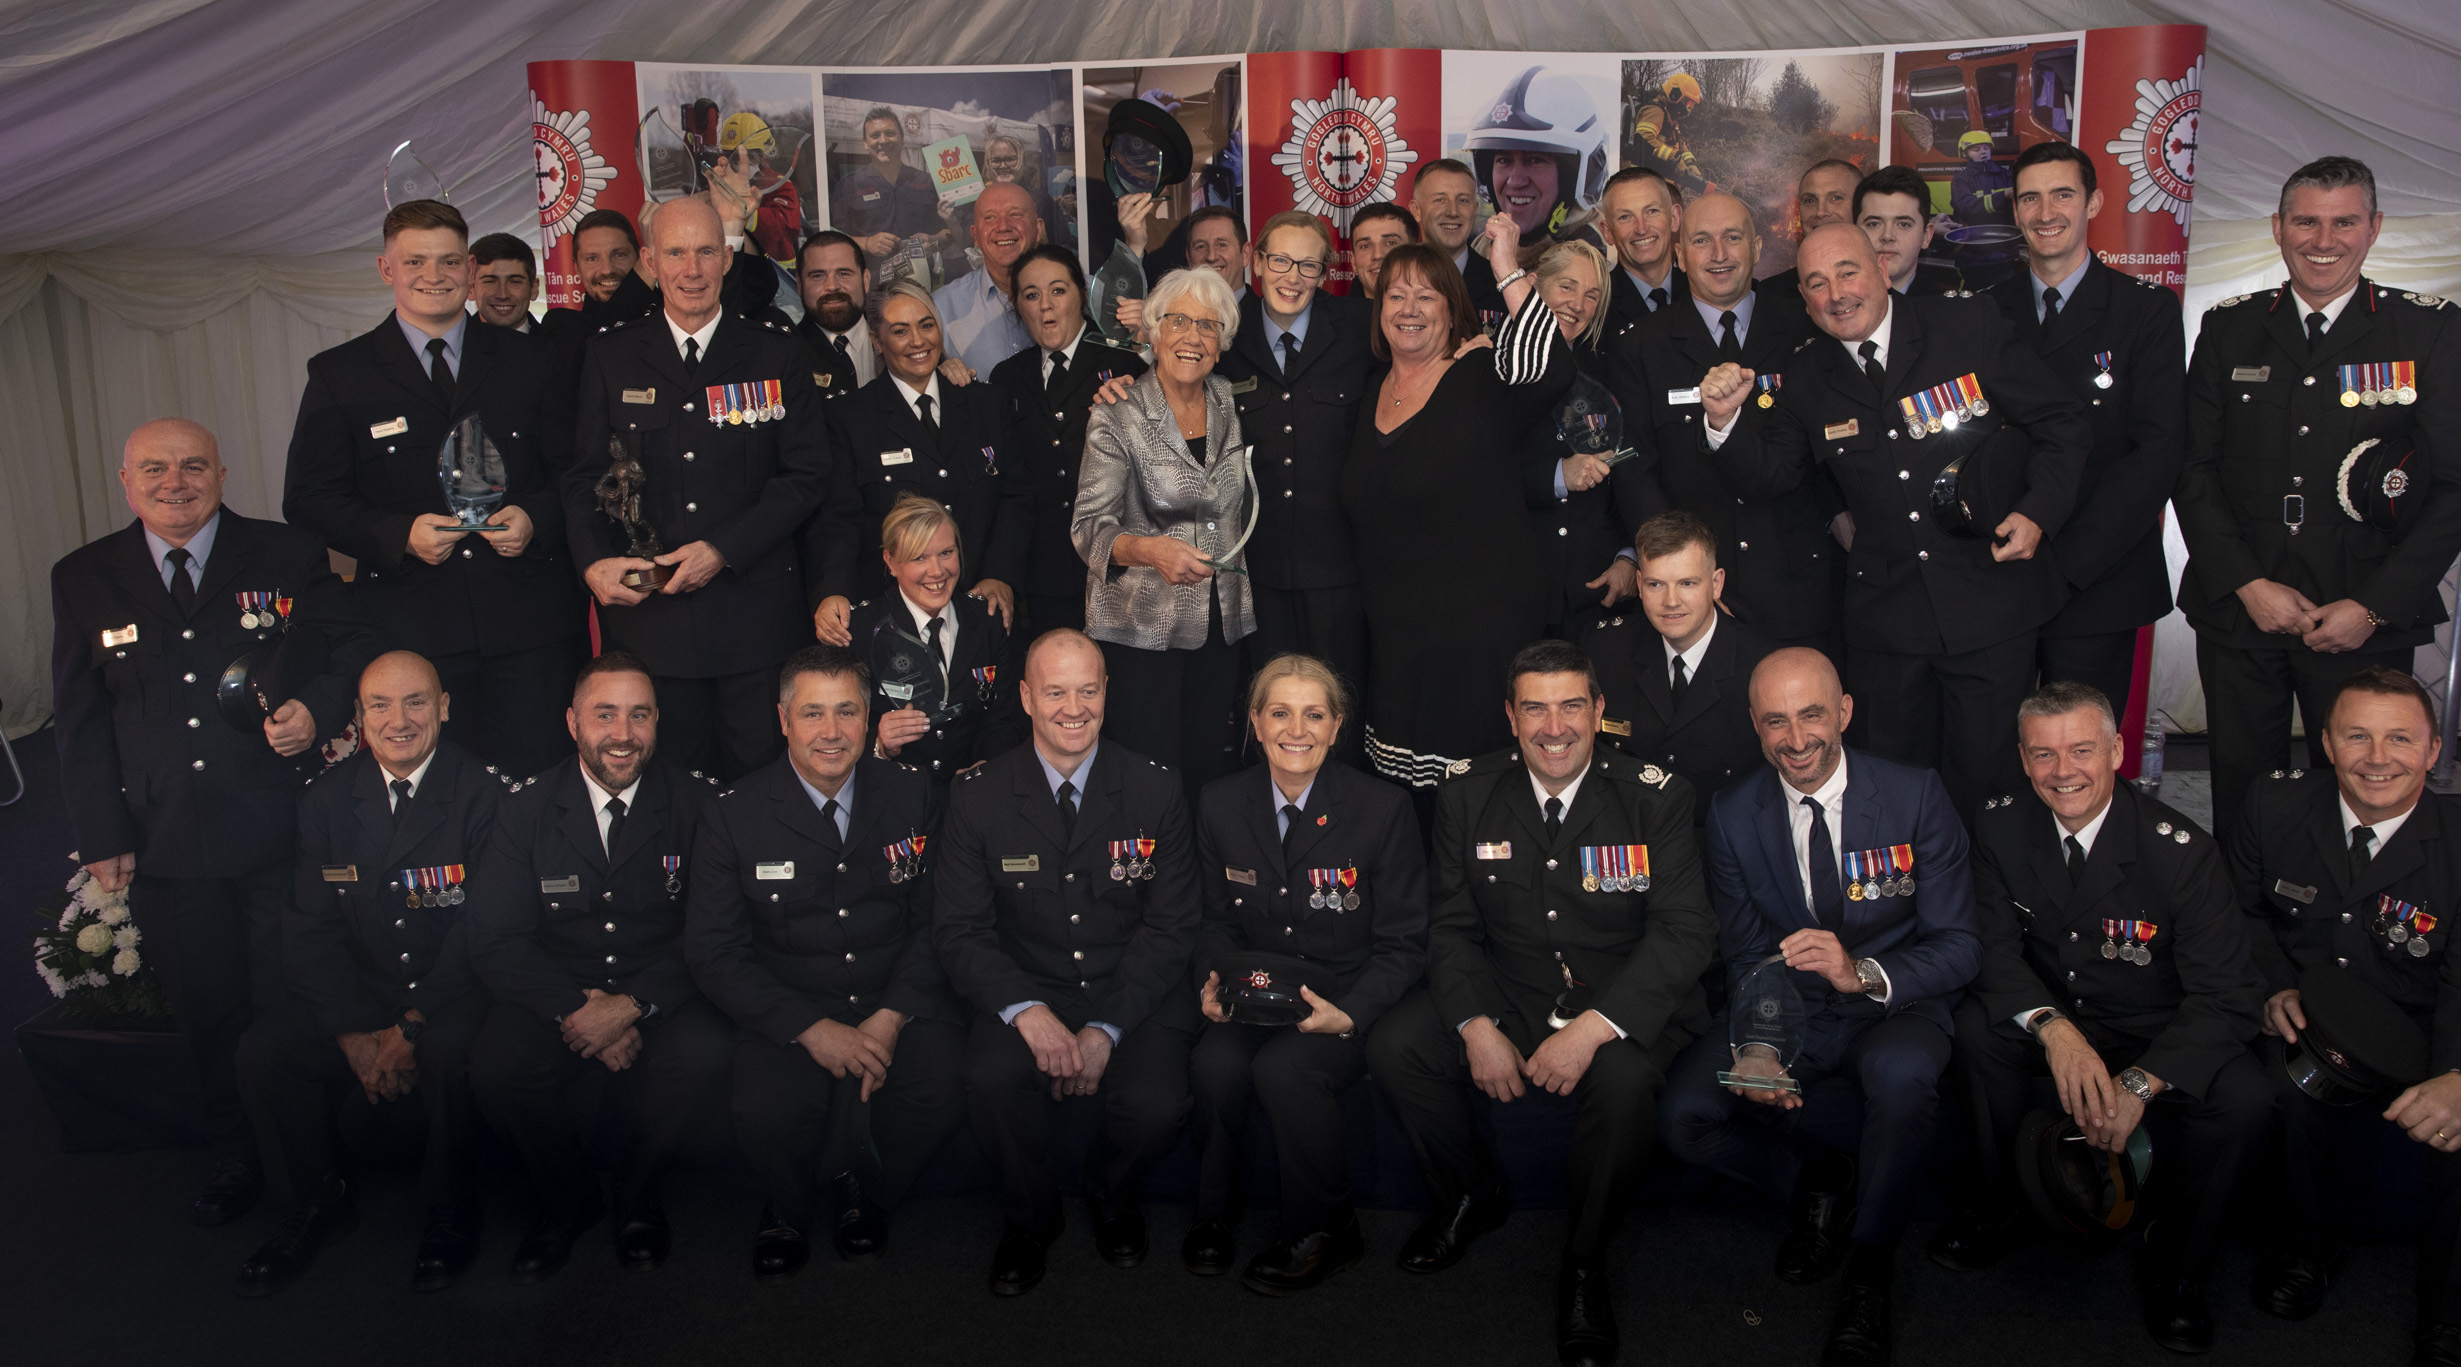 Staff honoured at 2022 Awards Ceremony